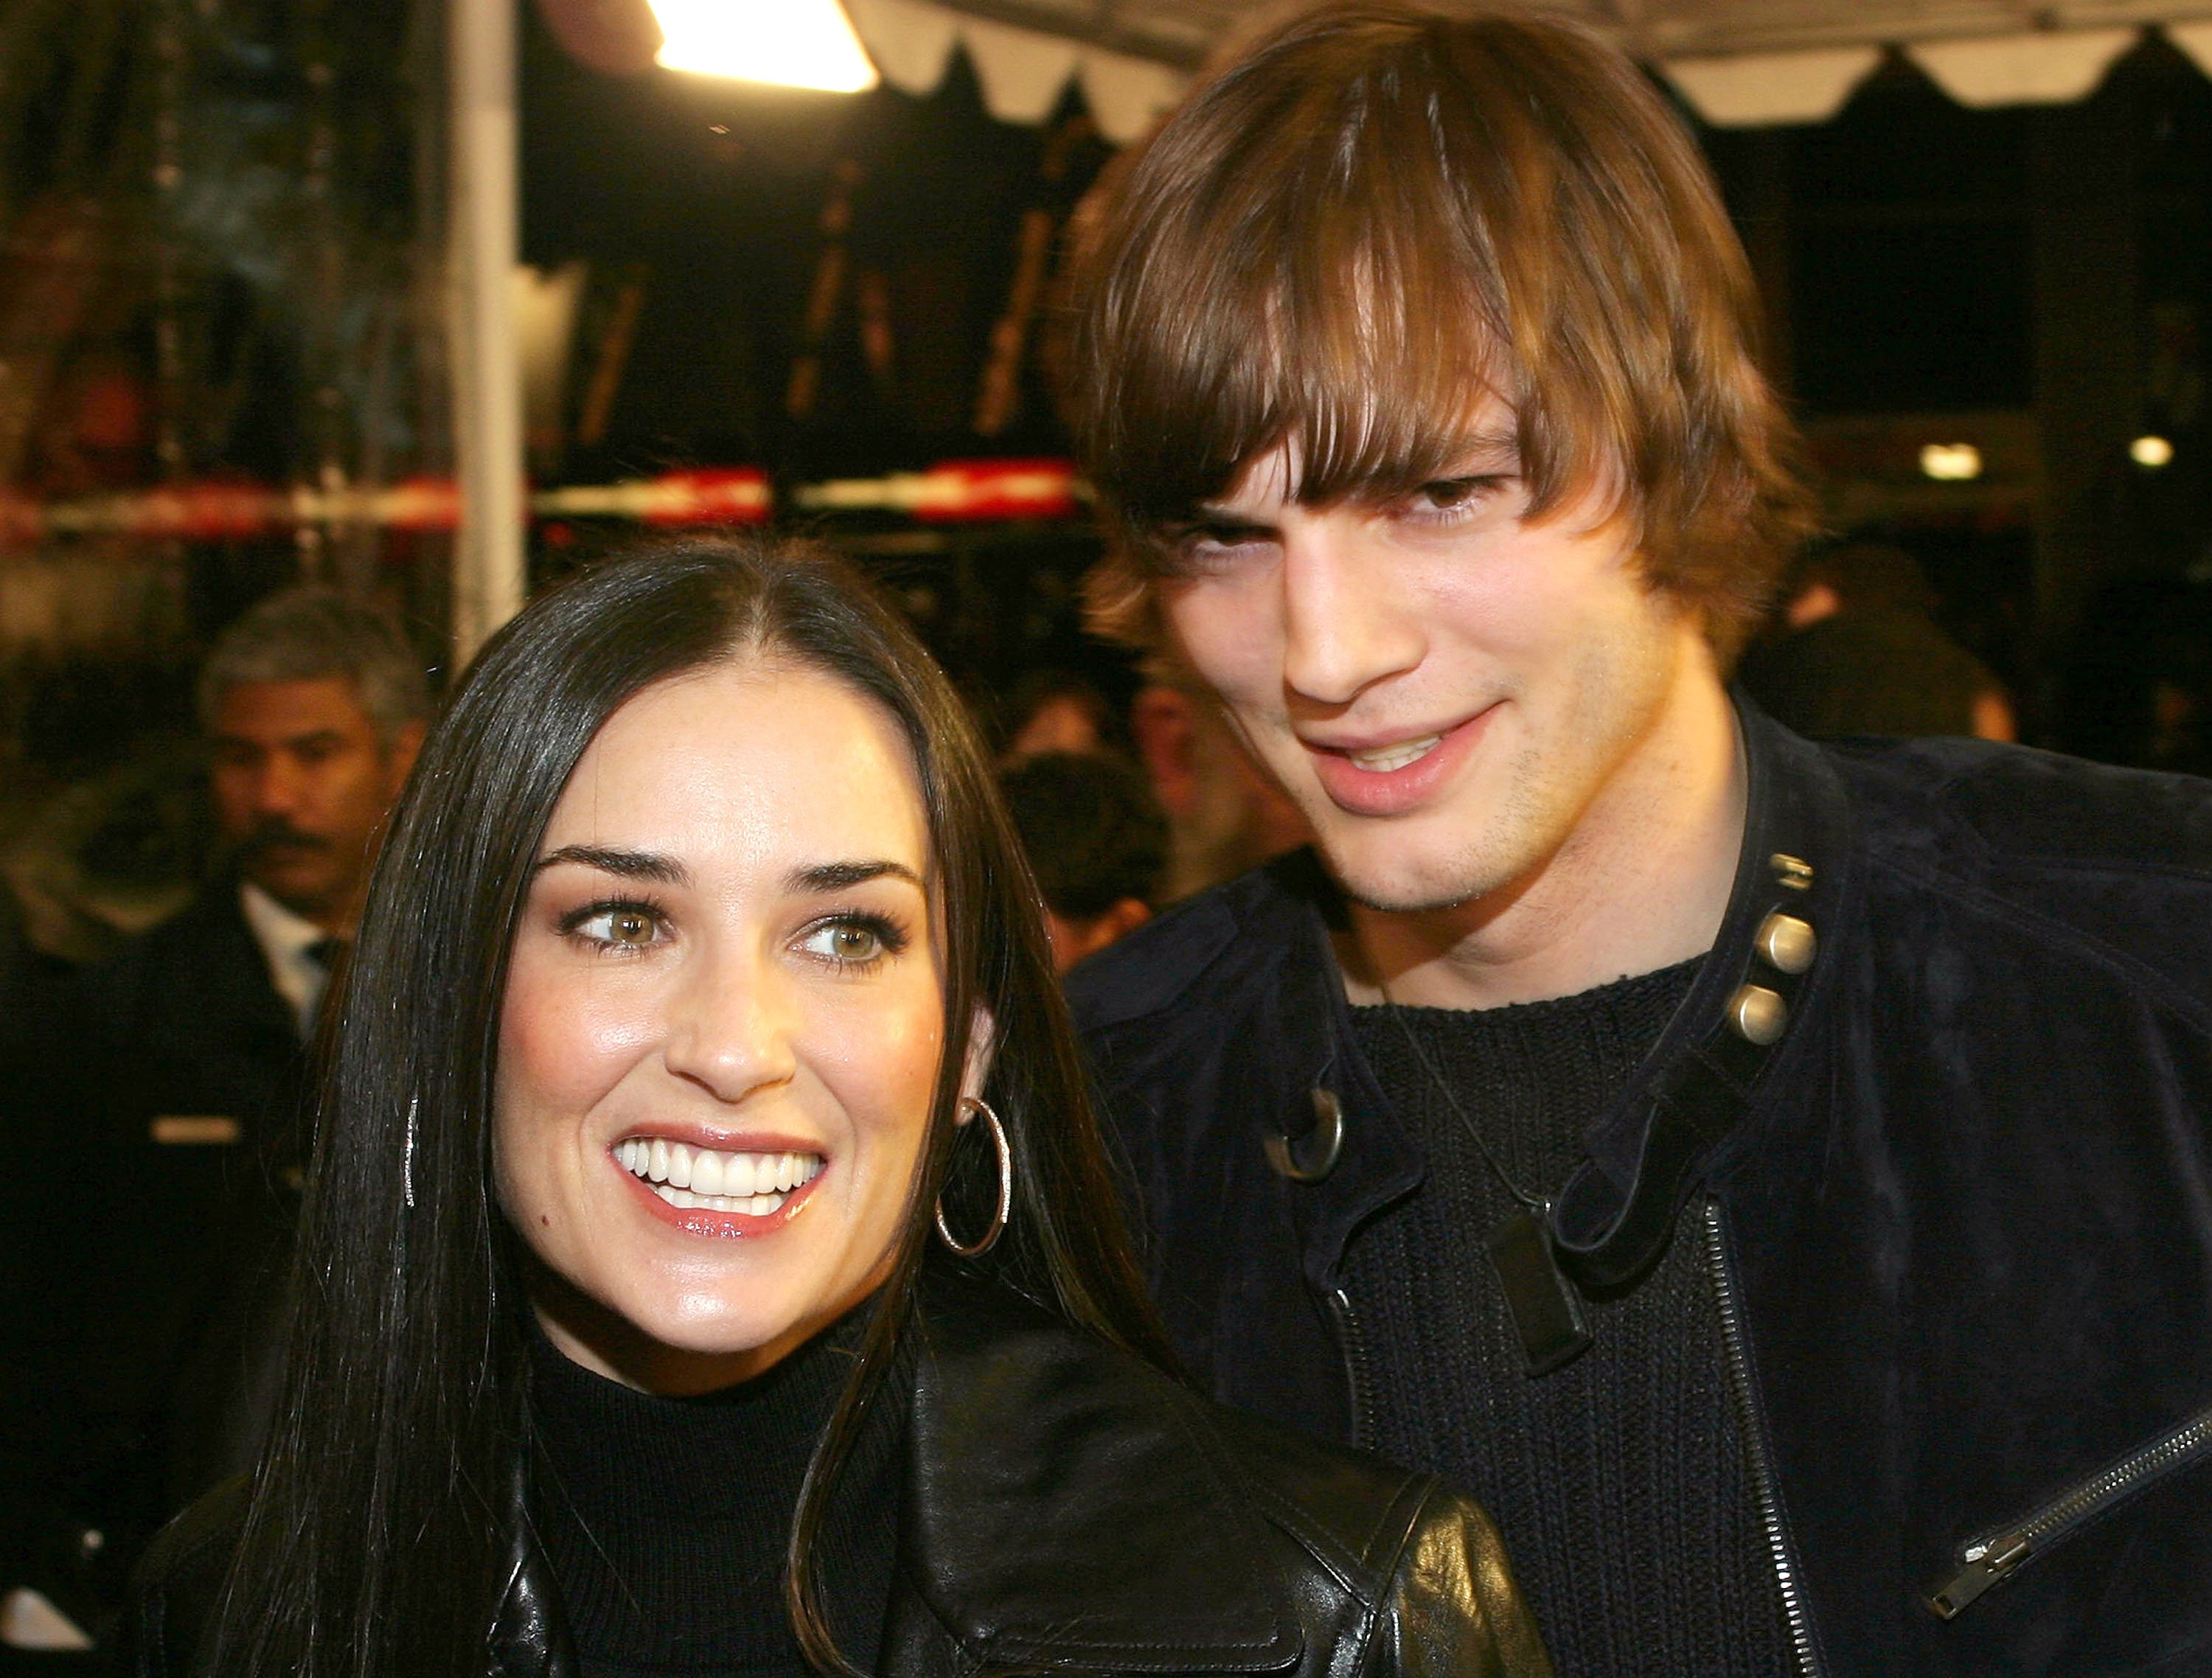 Ashton Kutcher and actress Demi Moore attend the Cheaper By The Dozen Premiere | Source: Getty Images